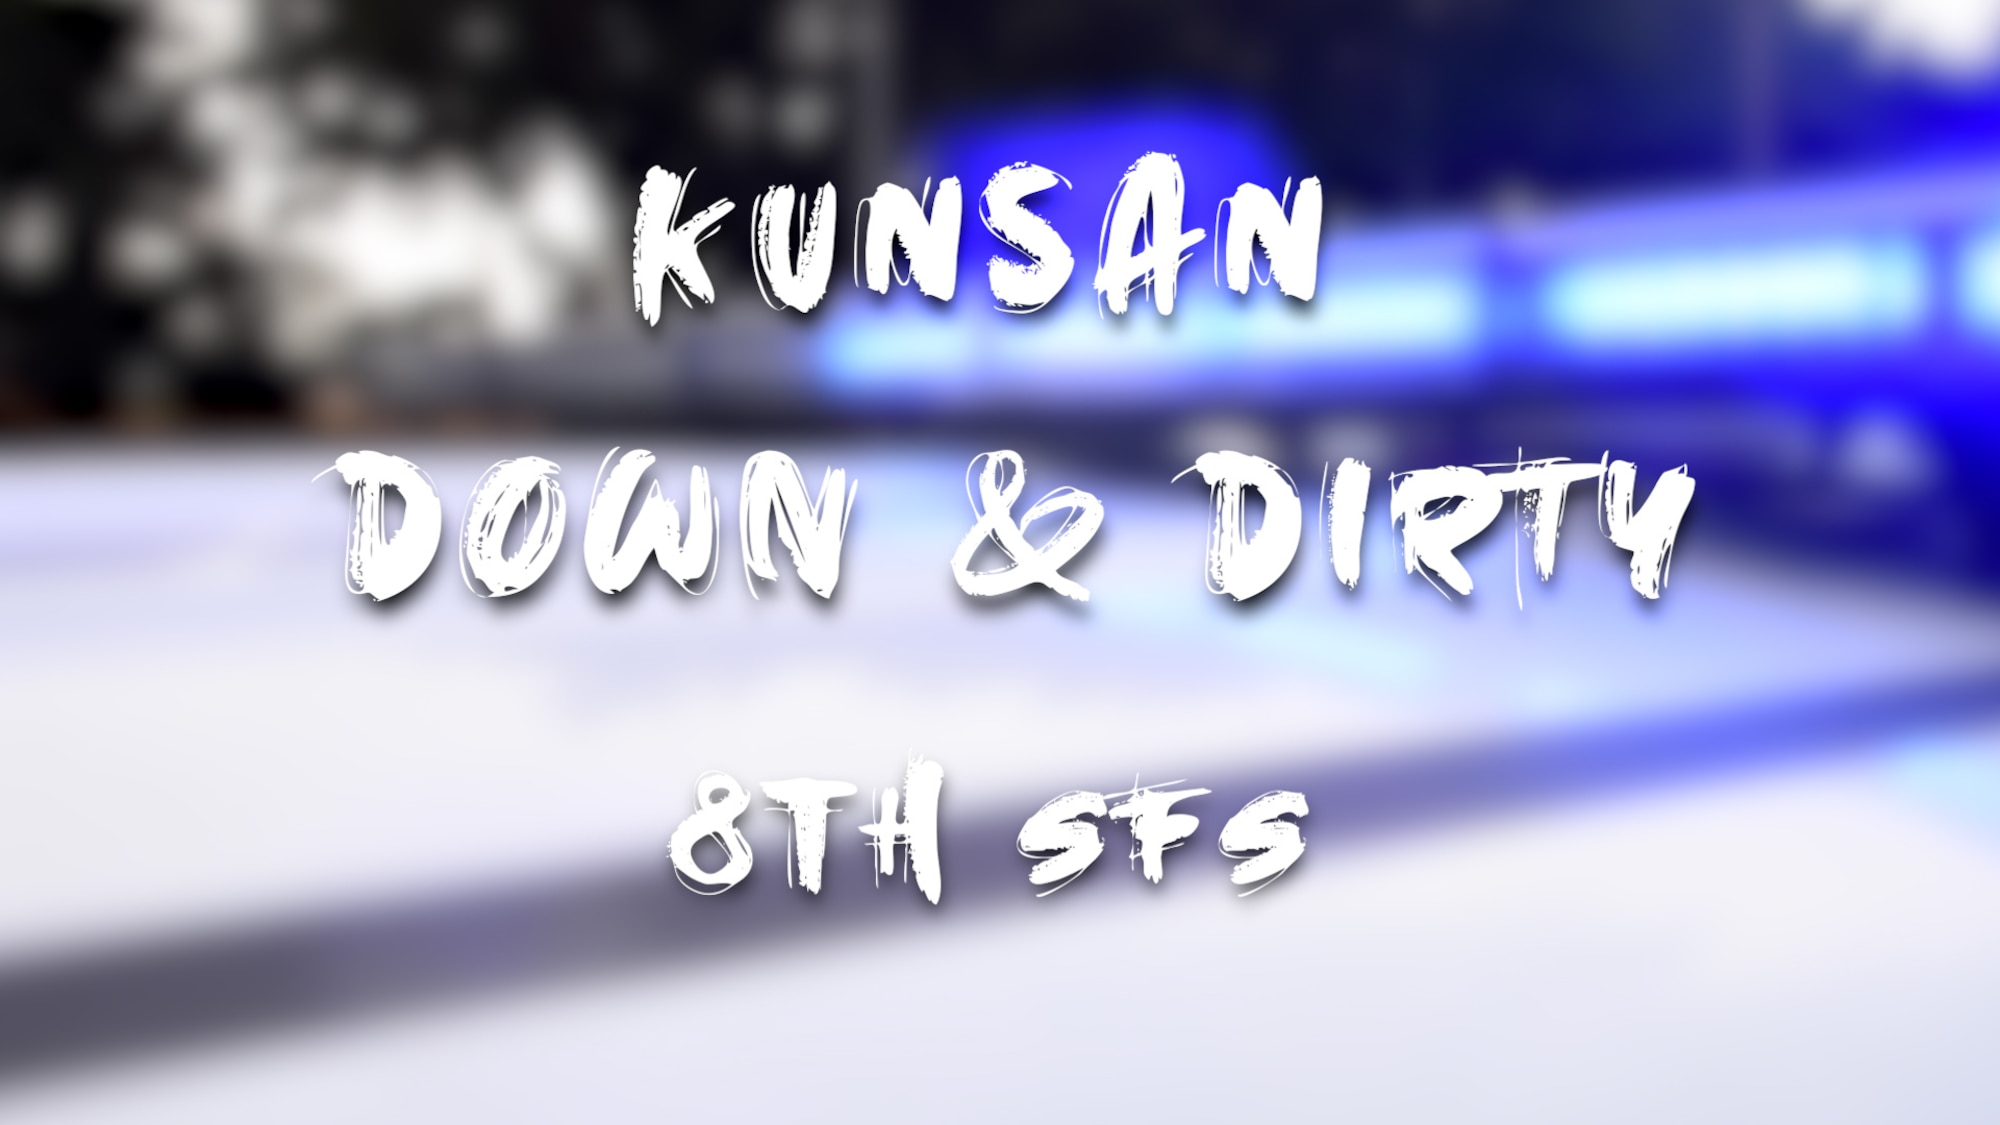 Kunsan Down & Dirty is back with another episode! Follow along as new guy Cameron gets insight into the 8th Security Forces Squadron. An integral part of the Wolf Pack, they uphold the law and train hard to counter any threat to the base. (U.S. Air Force illustration by Tech. Sgt. Timothy Dischinat)